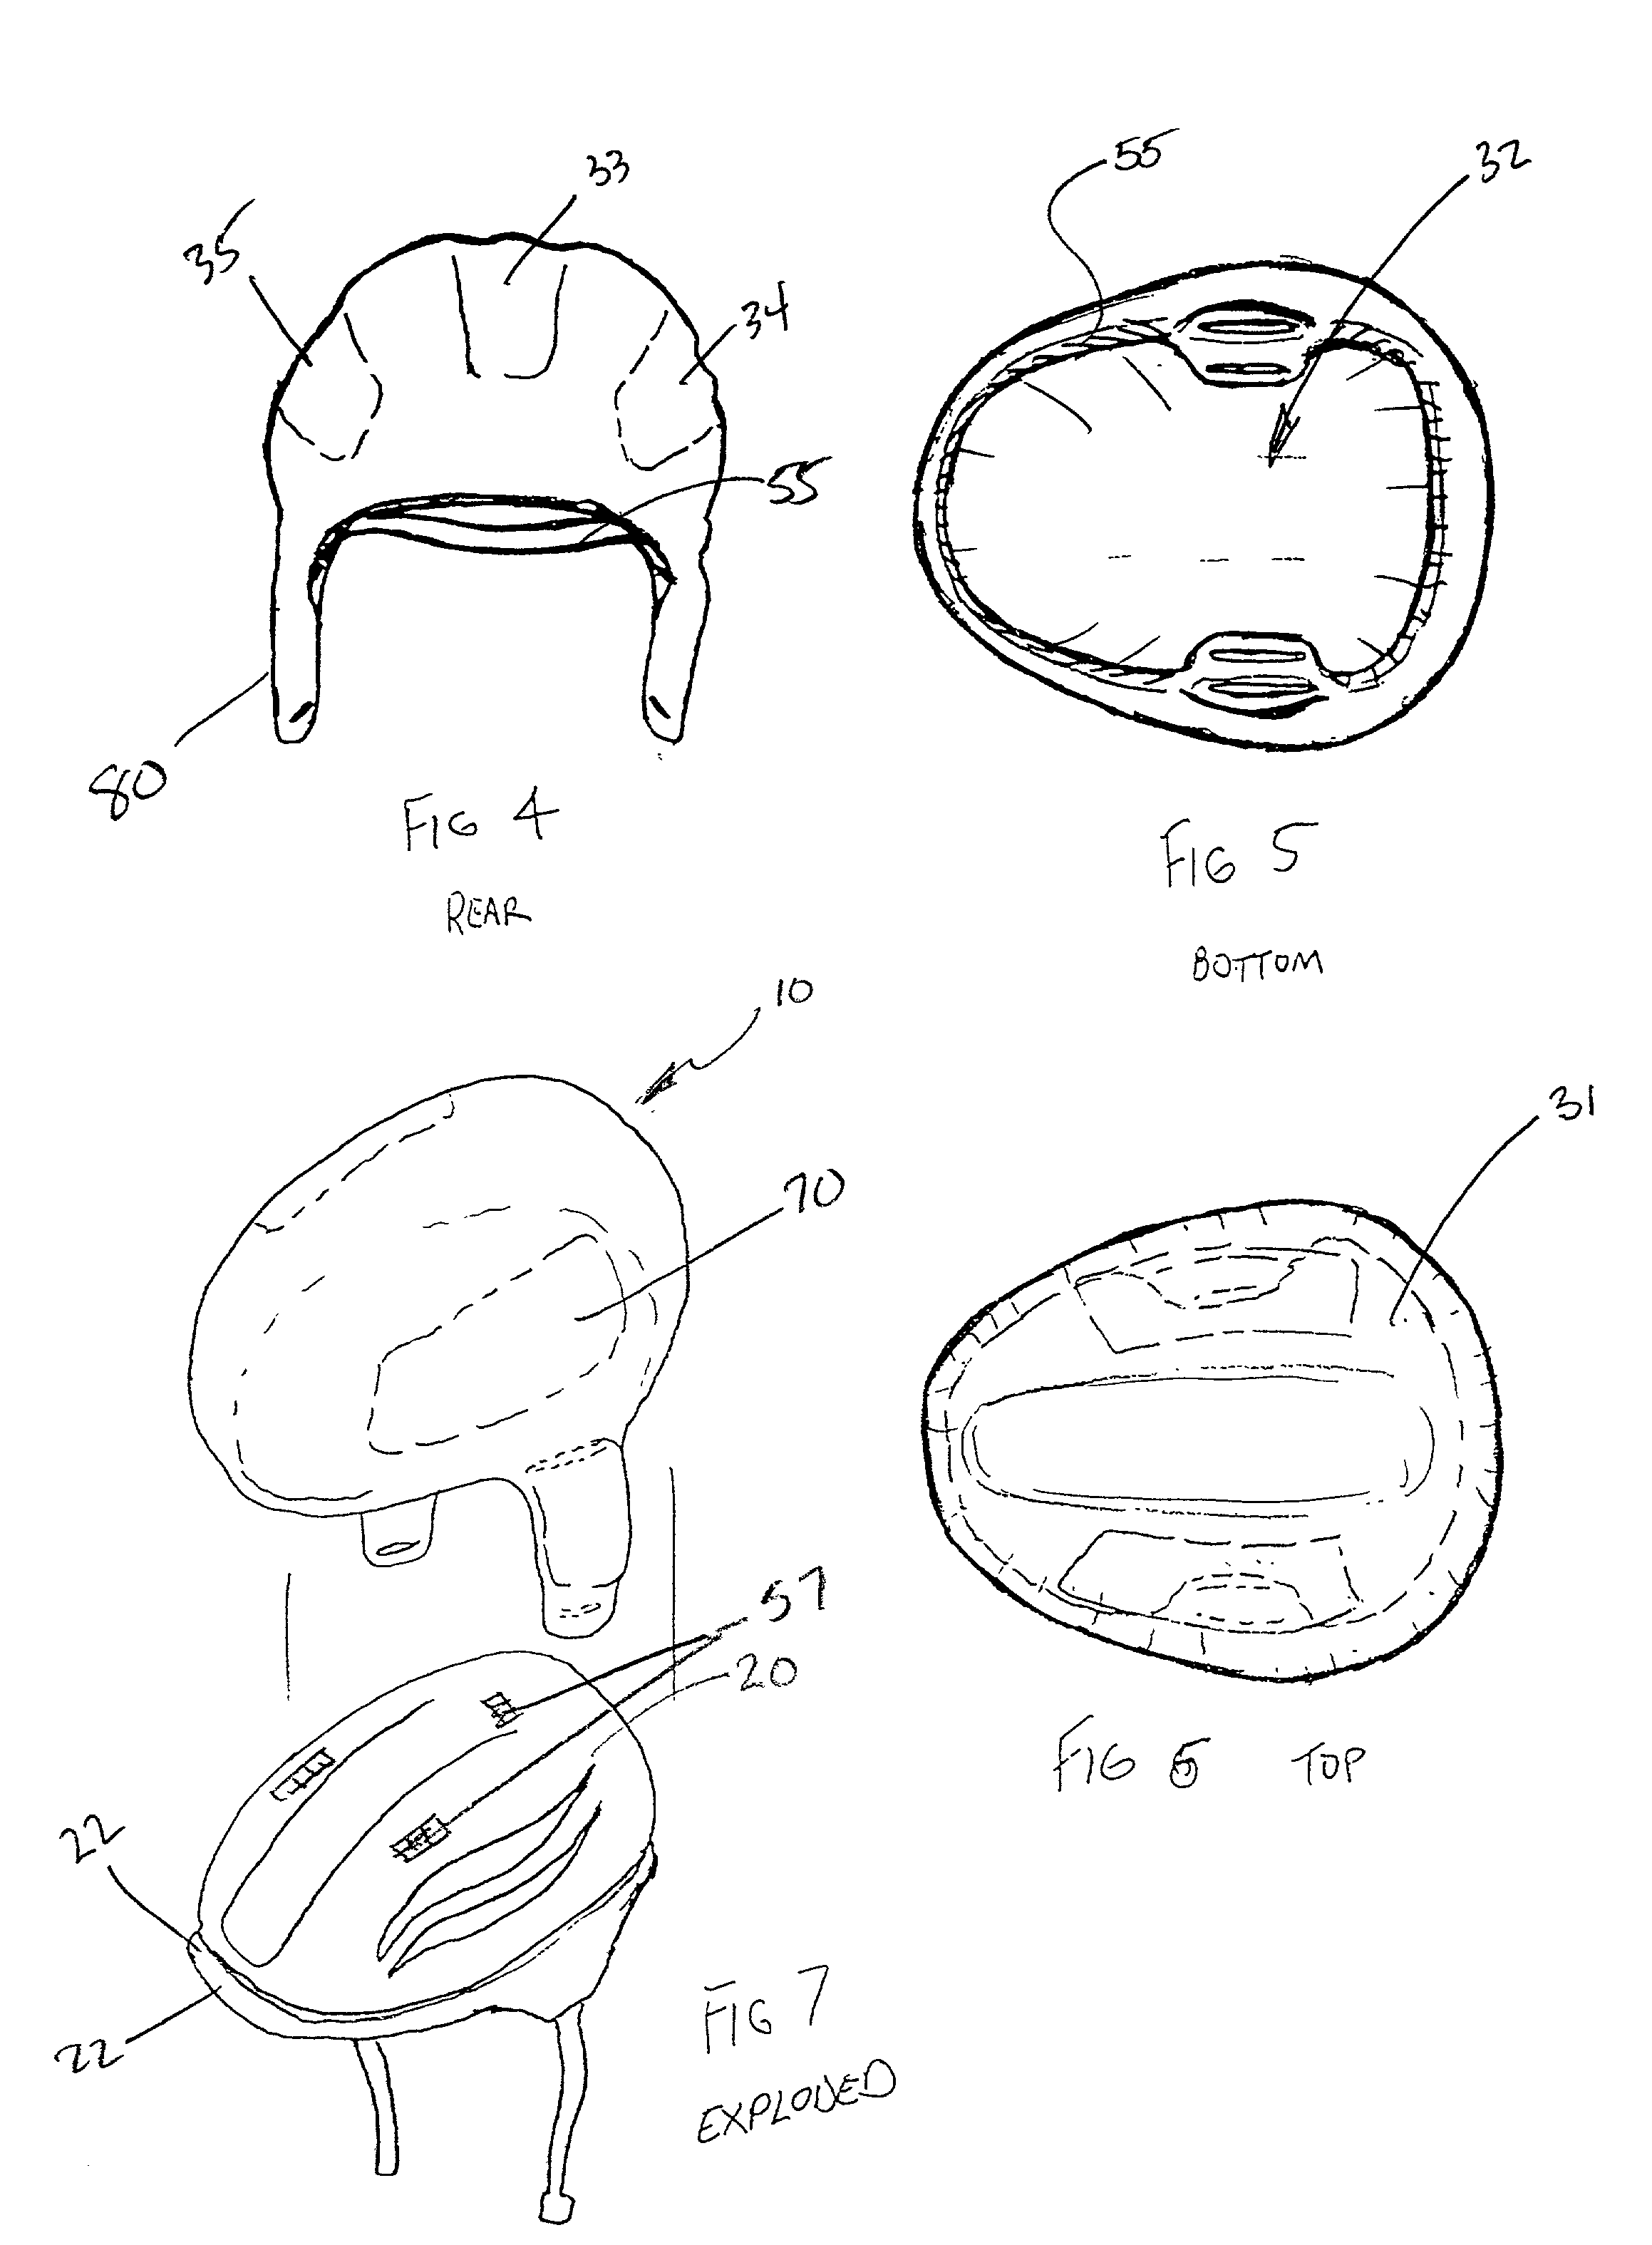 Slip-on, insulating and decorative cover for bicycle safety helmets